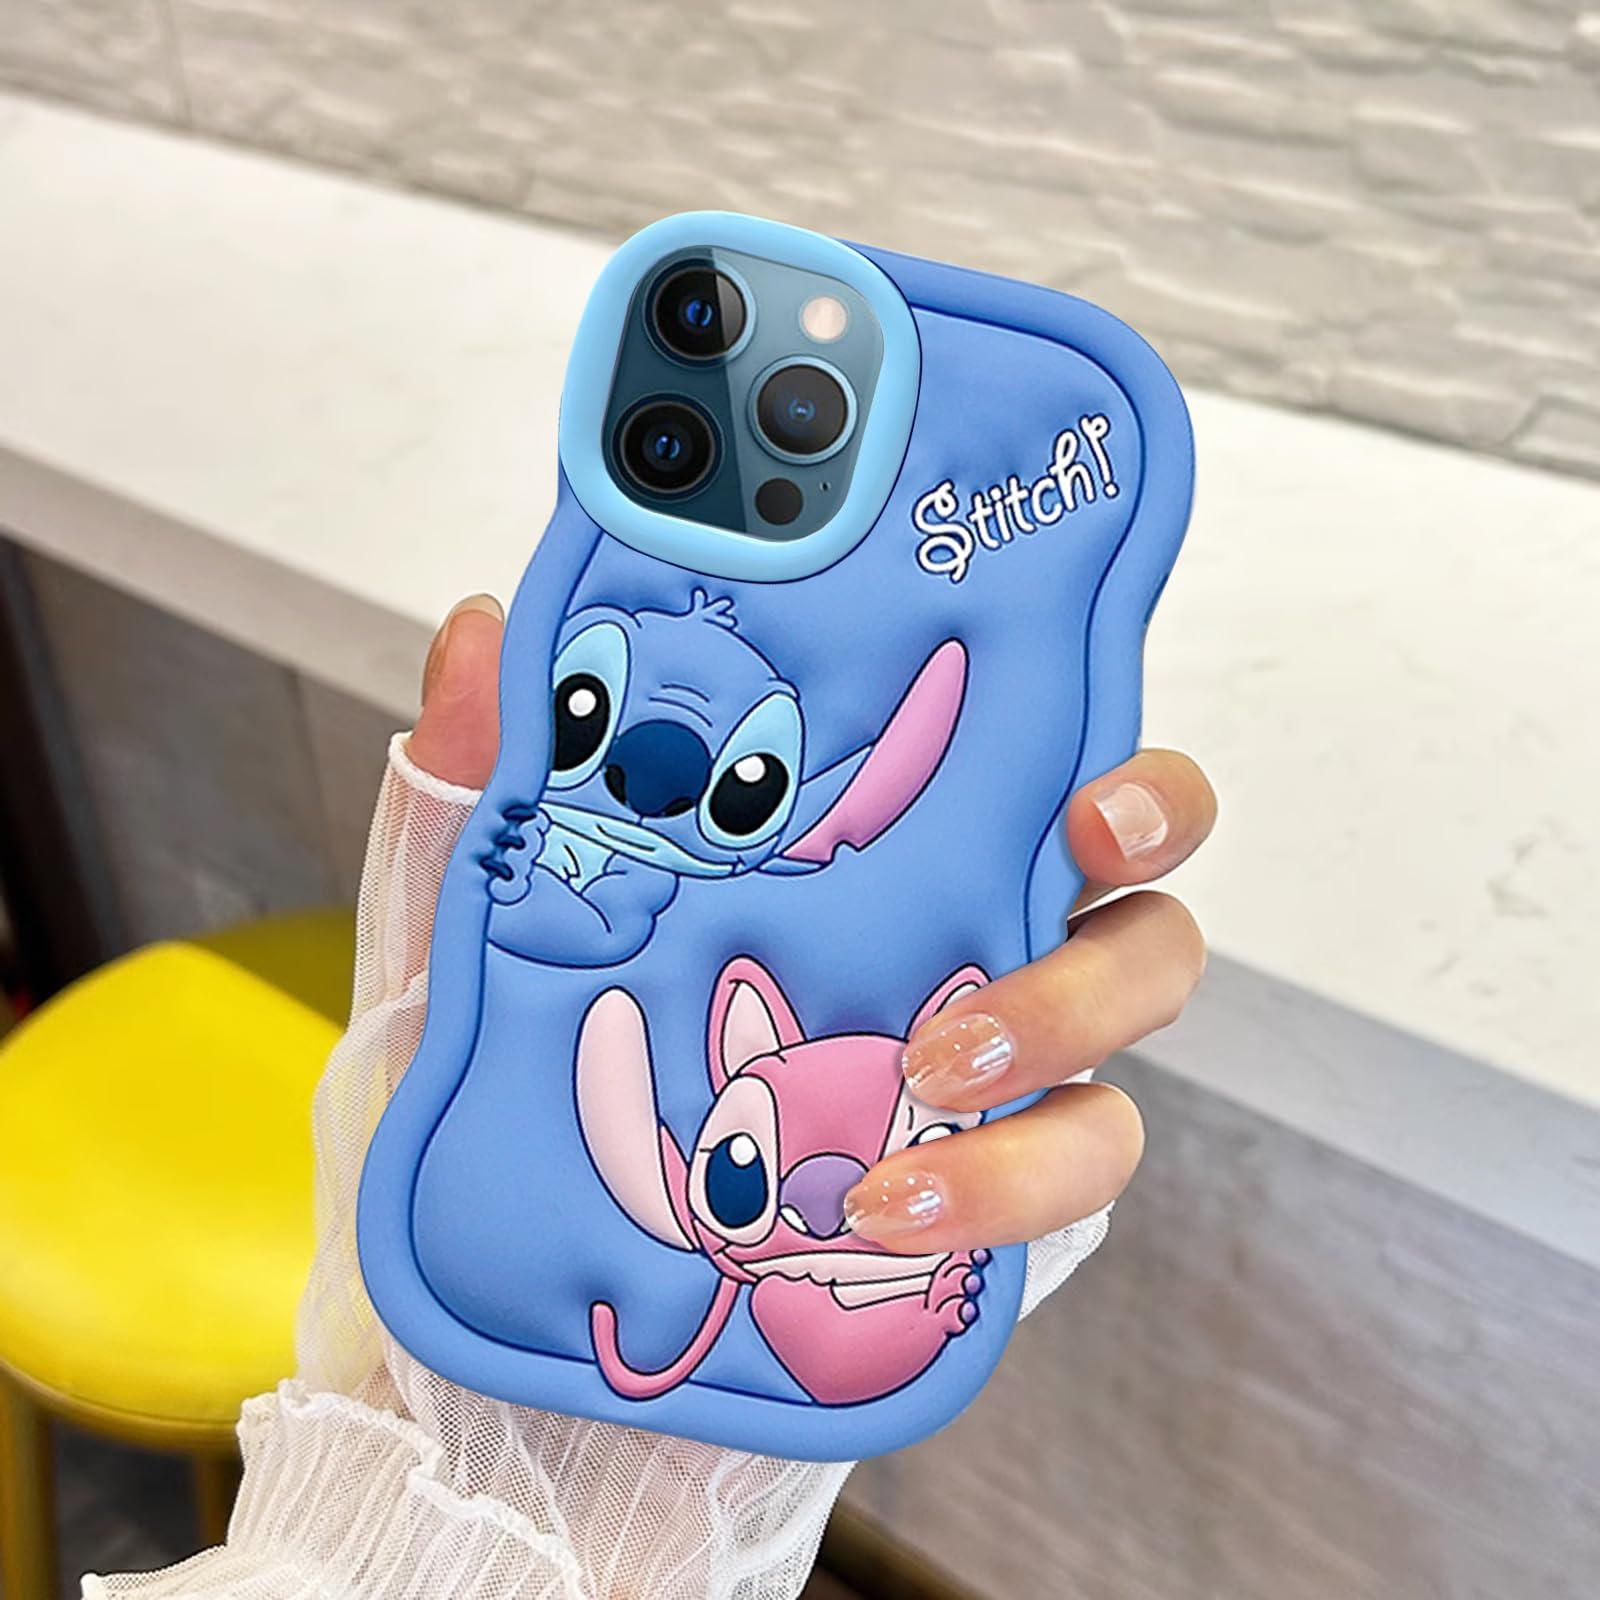 Cases for iPhone 12 Pro Max Case, Stich Cute 3D Cartoon Unique Soft Silicone Cool Animal Character Anti-Bump Protector Boys Kids Girls Gifts Cover Housing Skin Shell for iPhone 12 Pro Max 6.7”